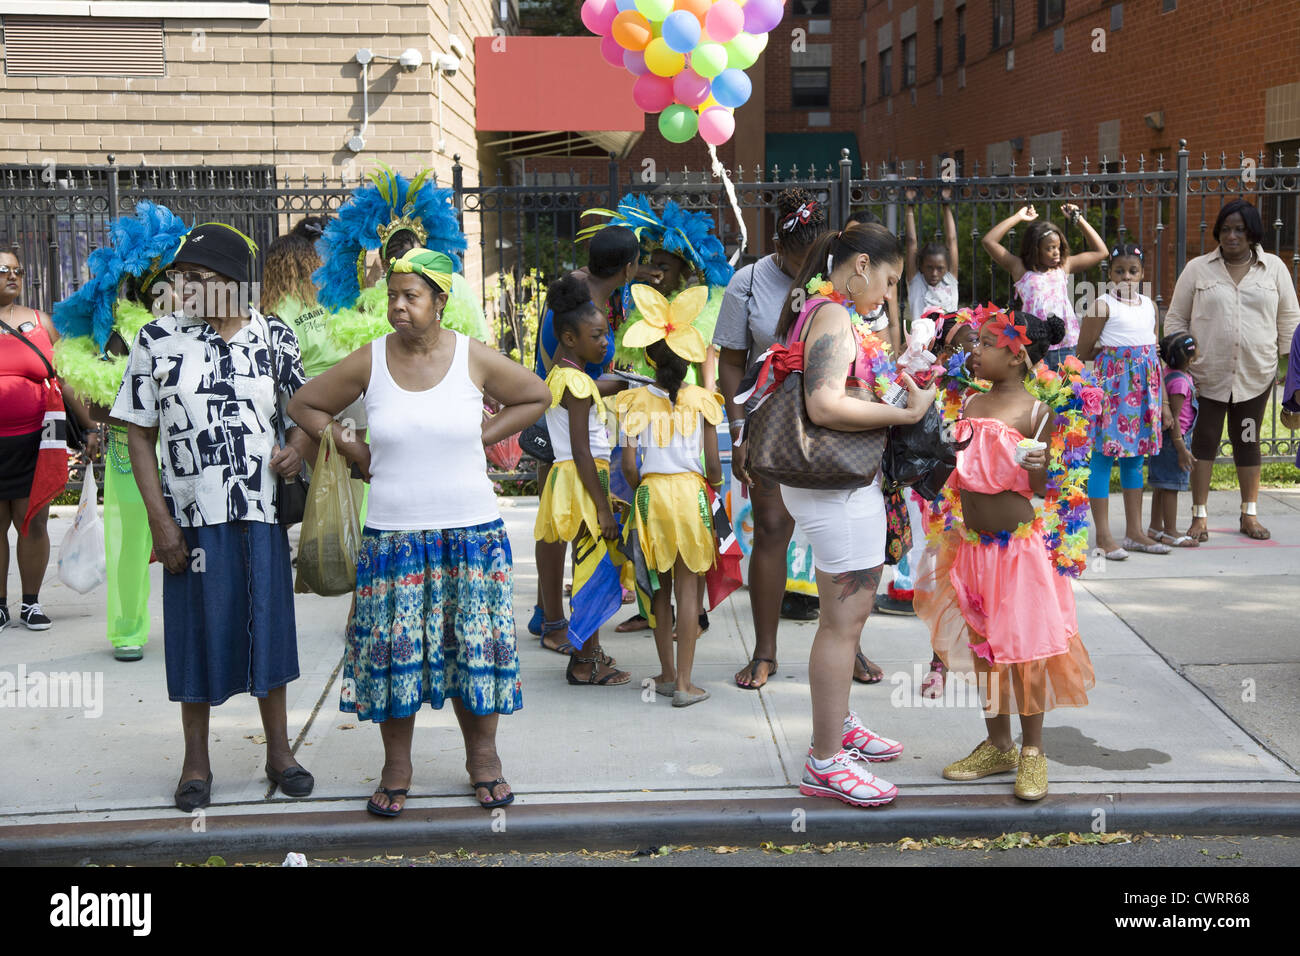 Participants and neighborhood onlookers at the West Indian Kiddies Parade in Crown Heights, Brooklyn, NY Stock Photo